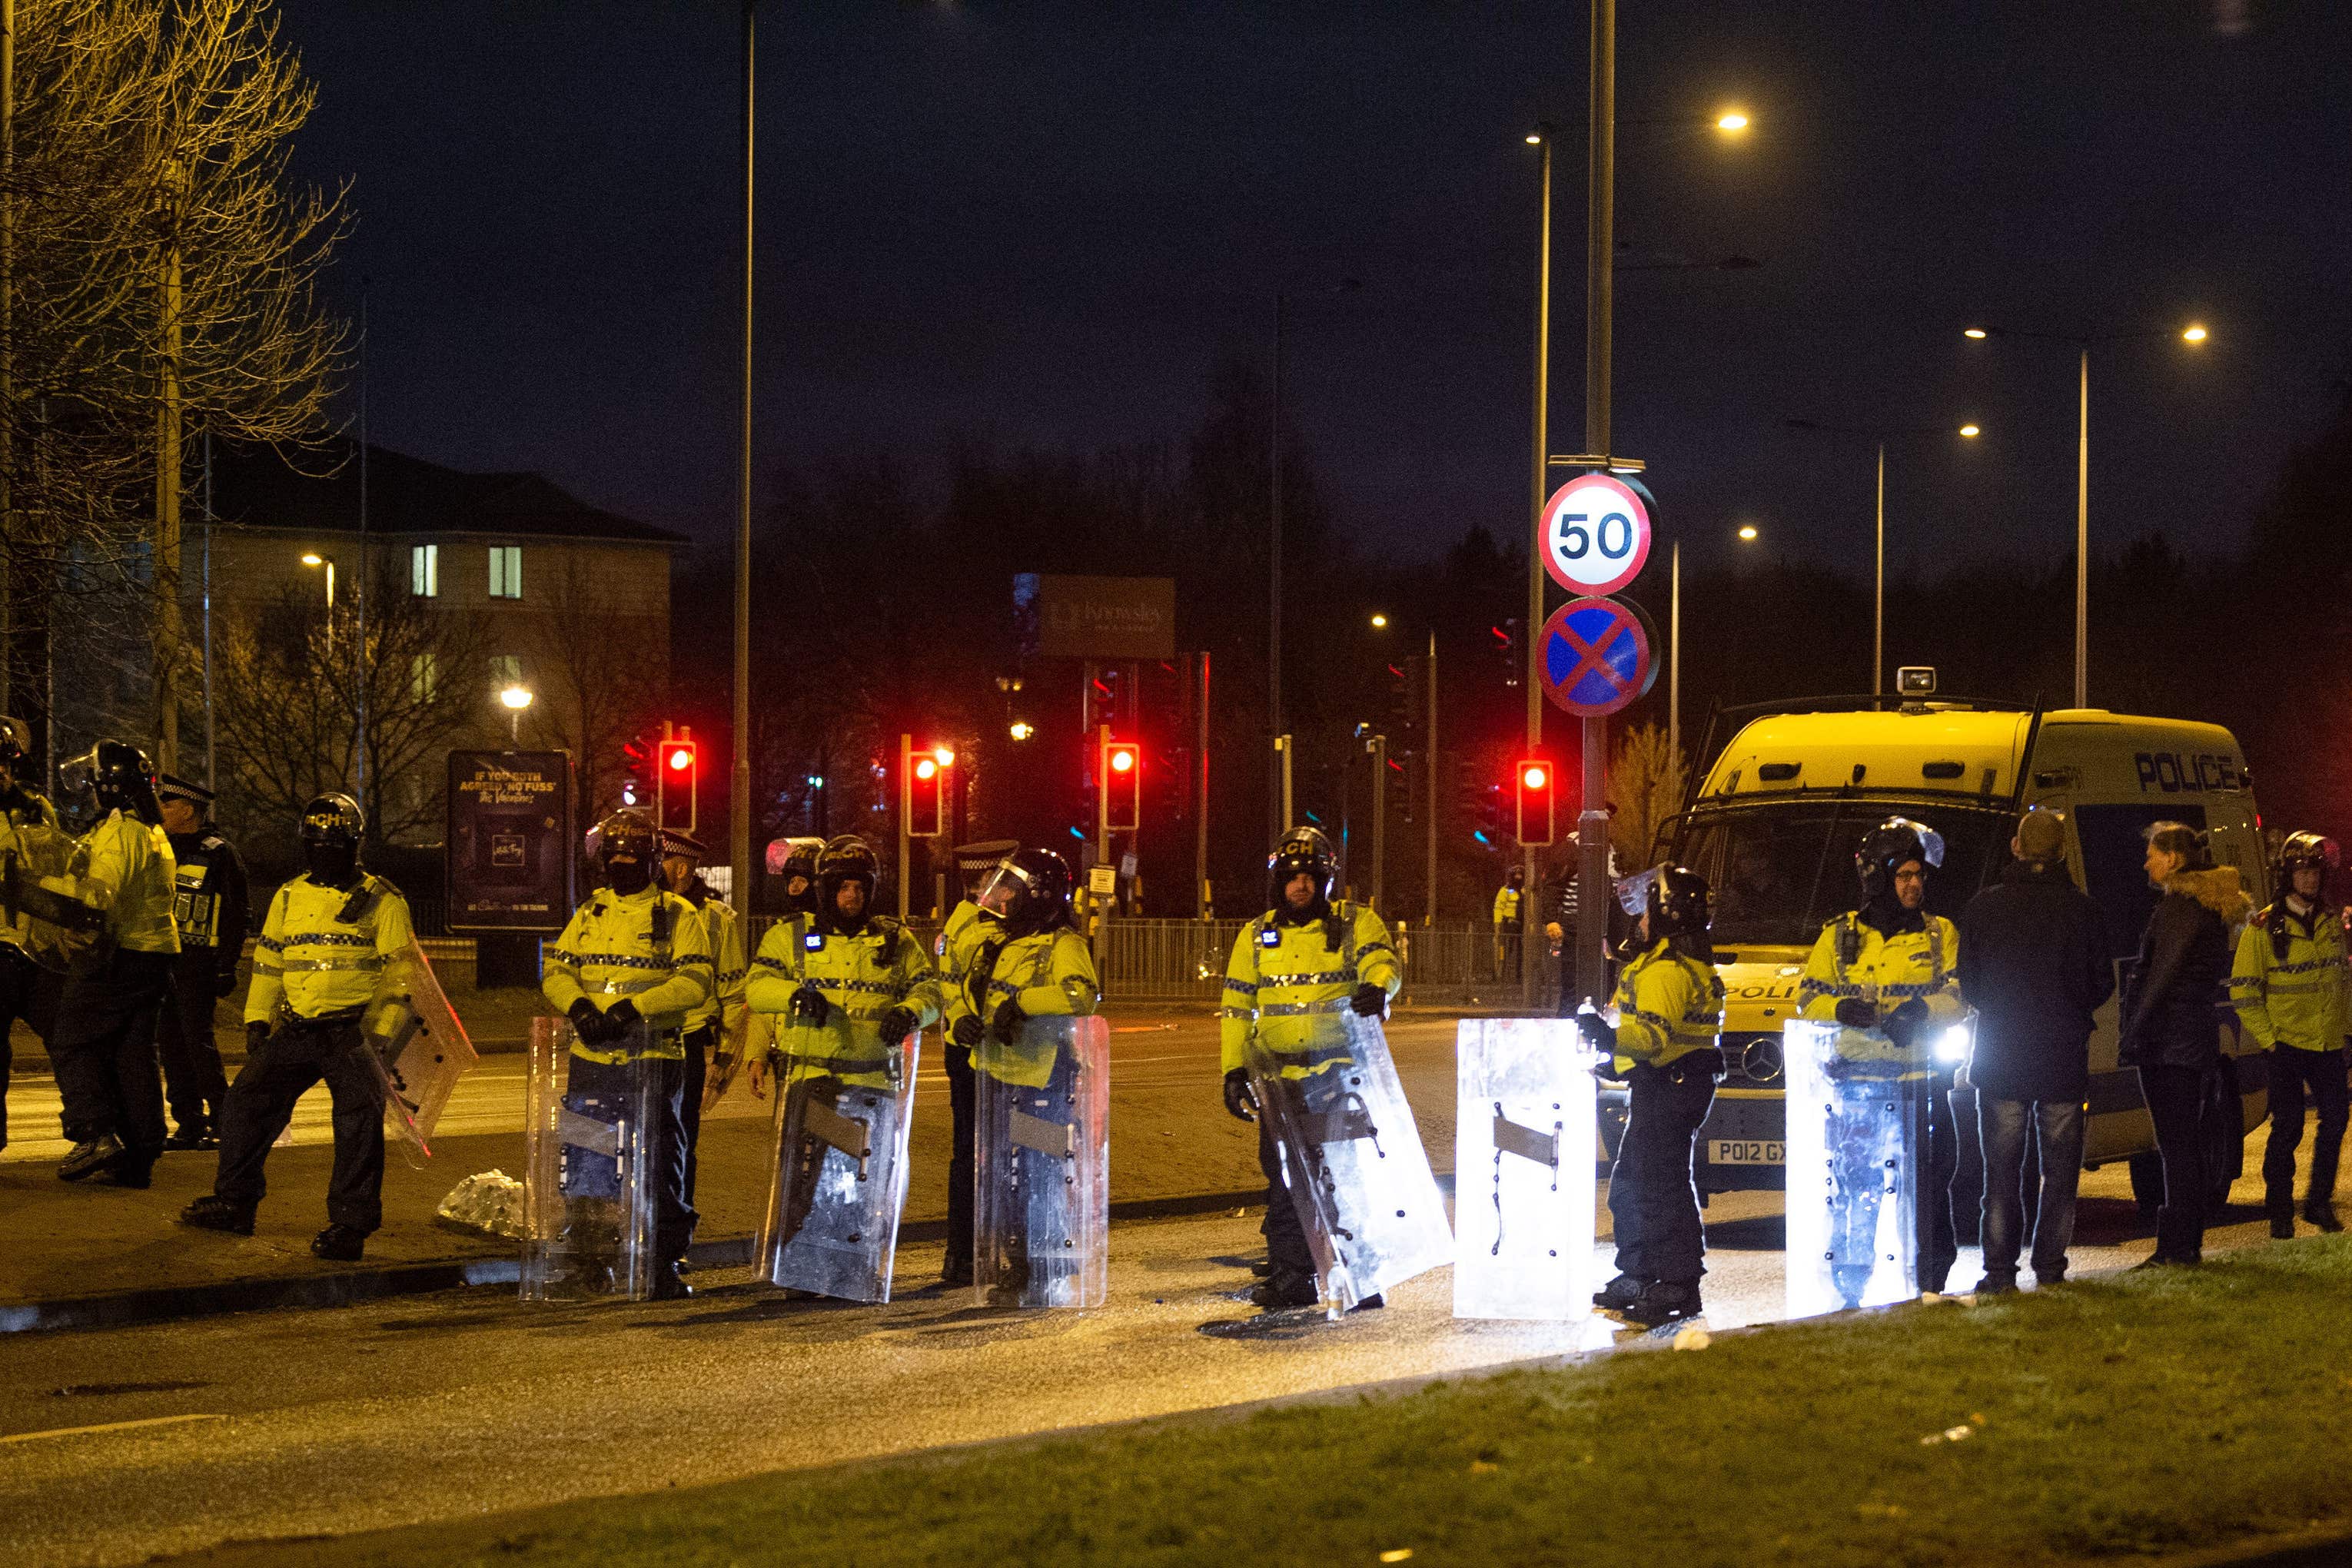 Police in riot gear after a demonstration outside the Suites Hotel in Knowsley (Peter Powell/PA)